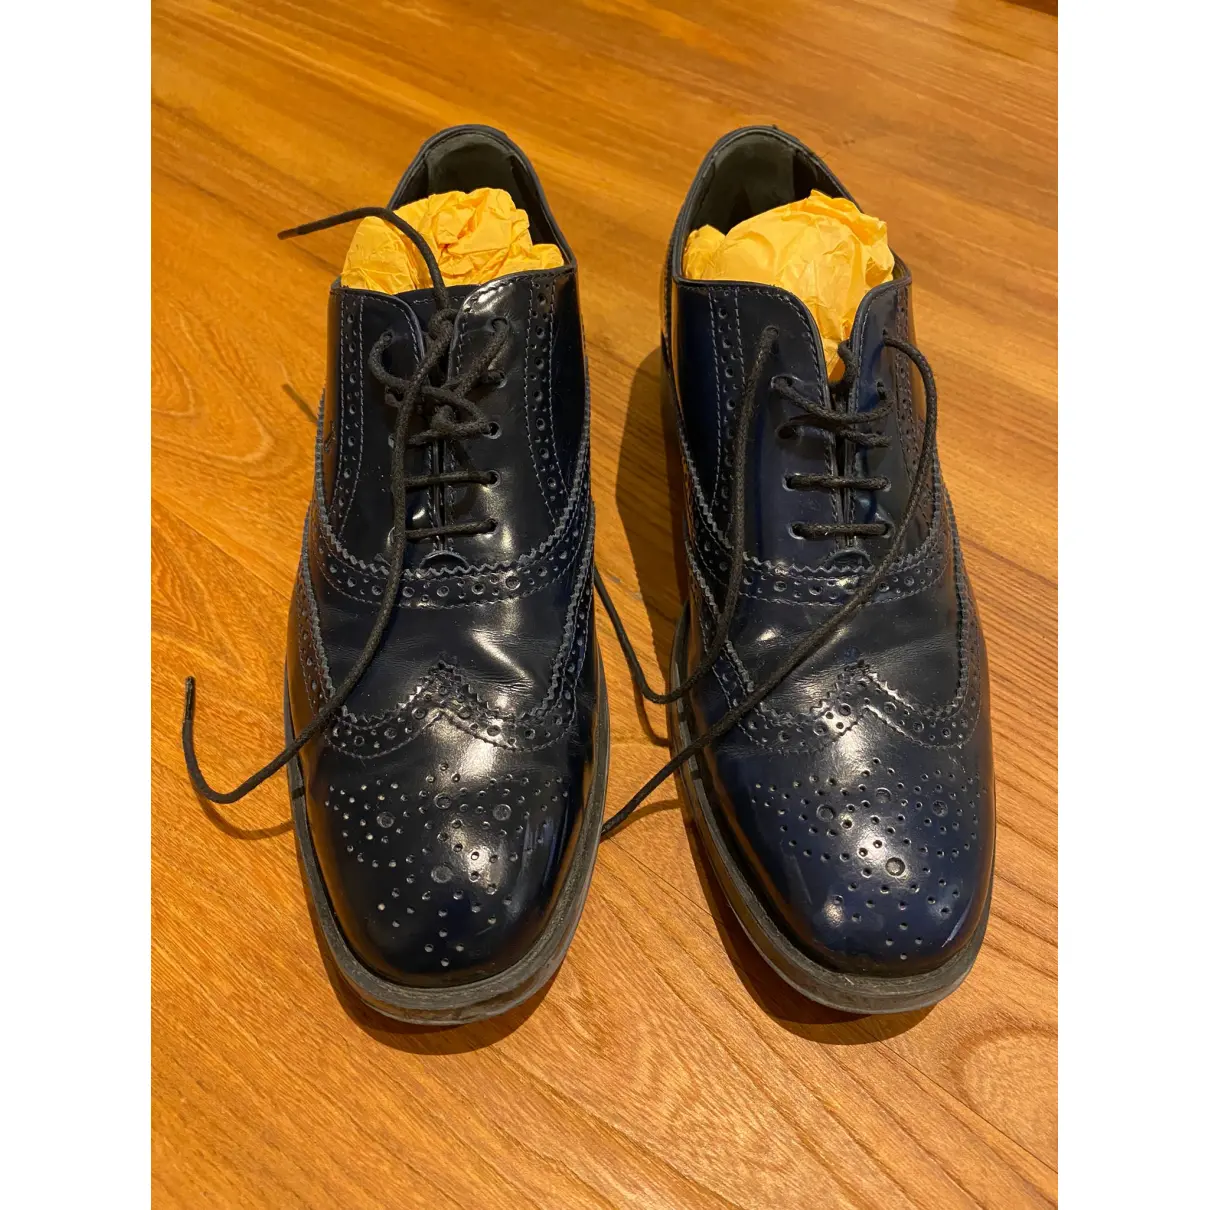 Buy Tod's Patent leather lace ups online